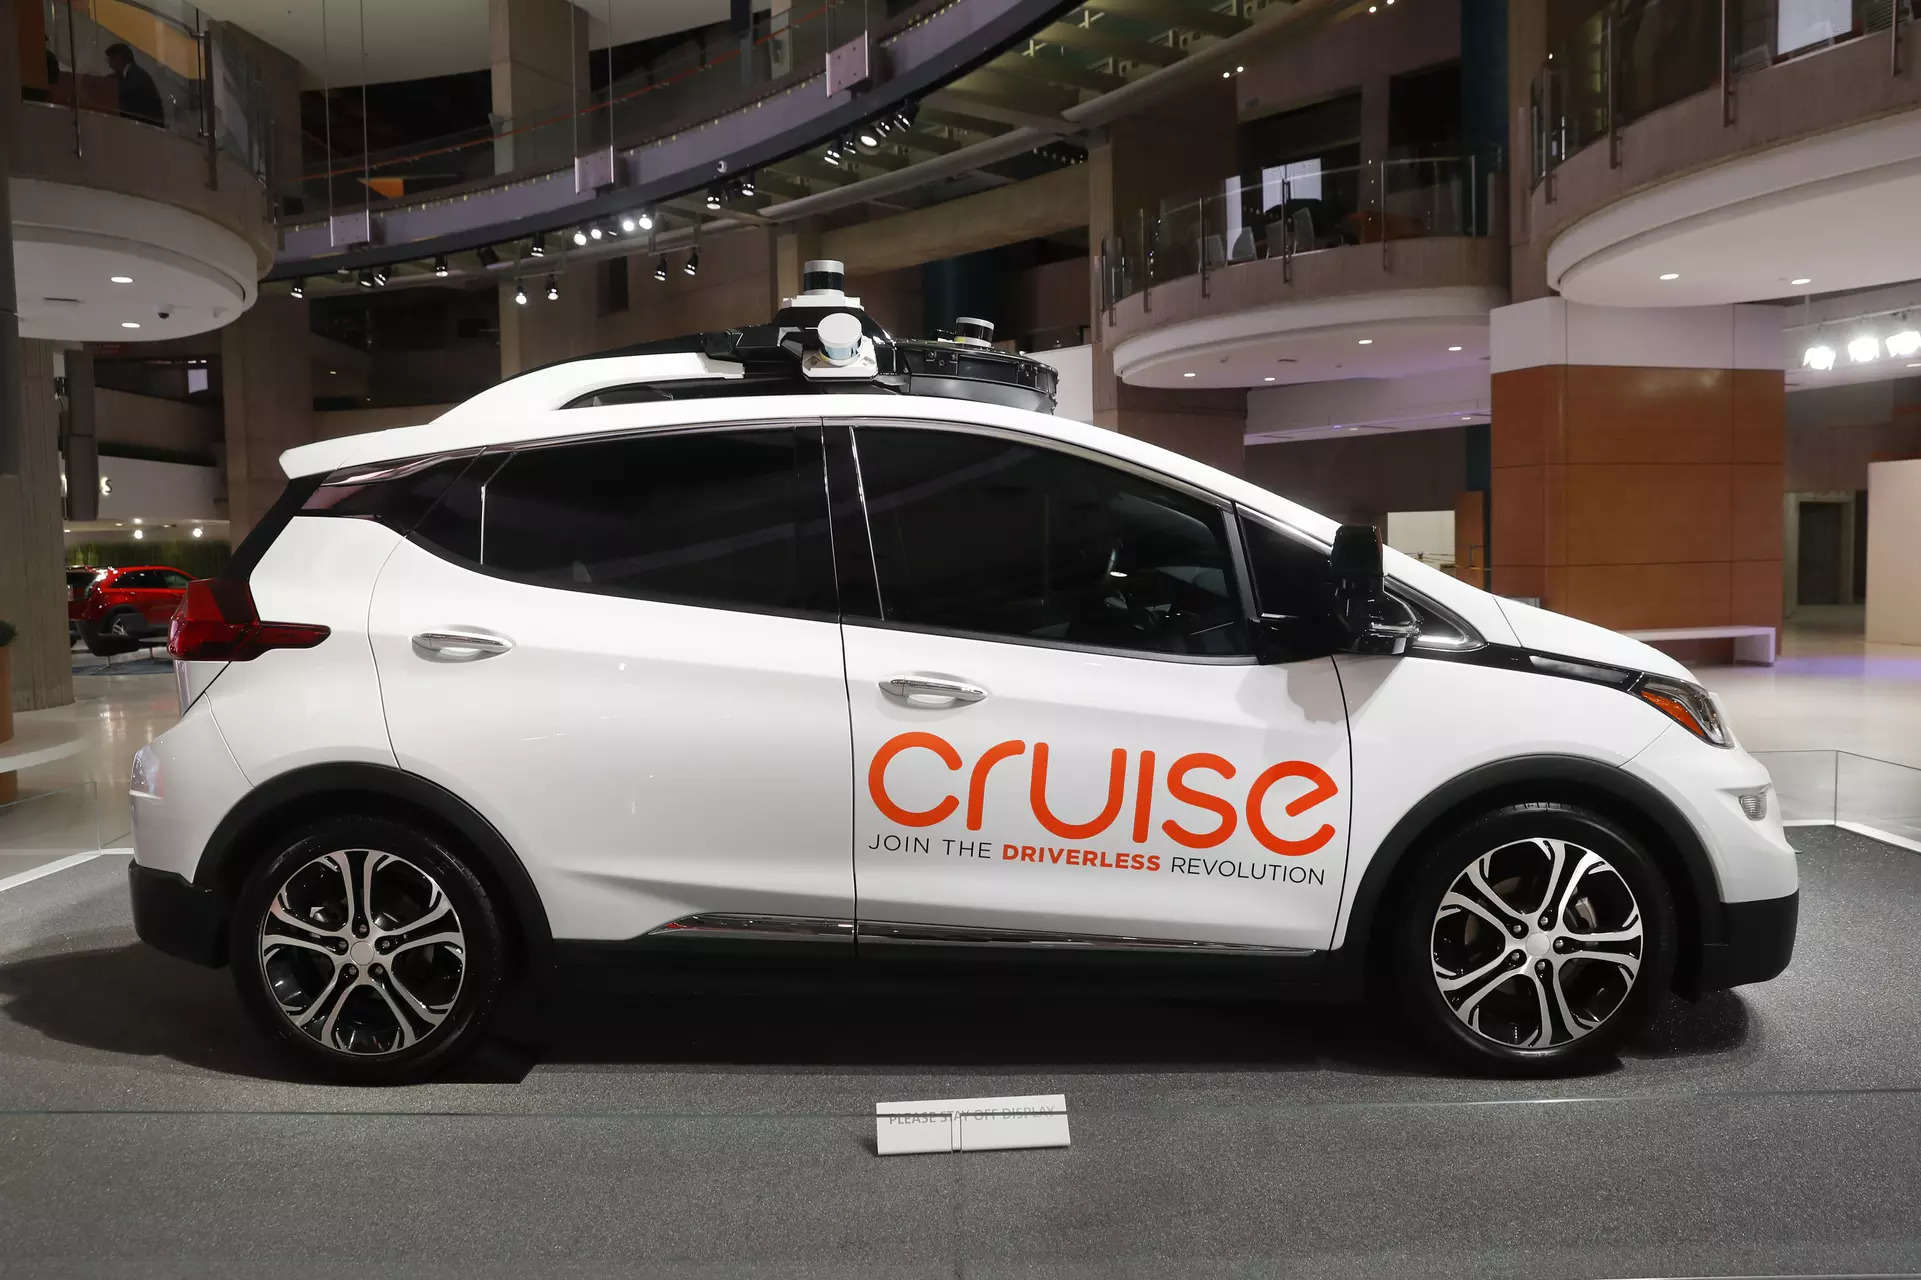 <p>It is also a setback for an industry dependent on public trust and the cooperation of regulators. Cruise had in recent months touted ambitious plans to expand to more cities, offering fully autonomous taxi rides.</p>